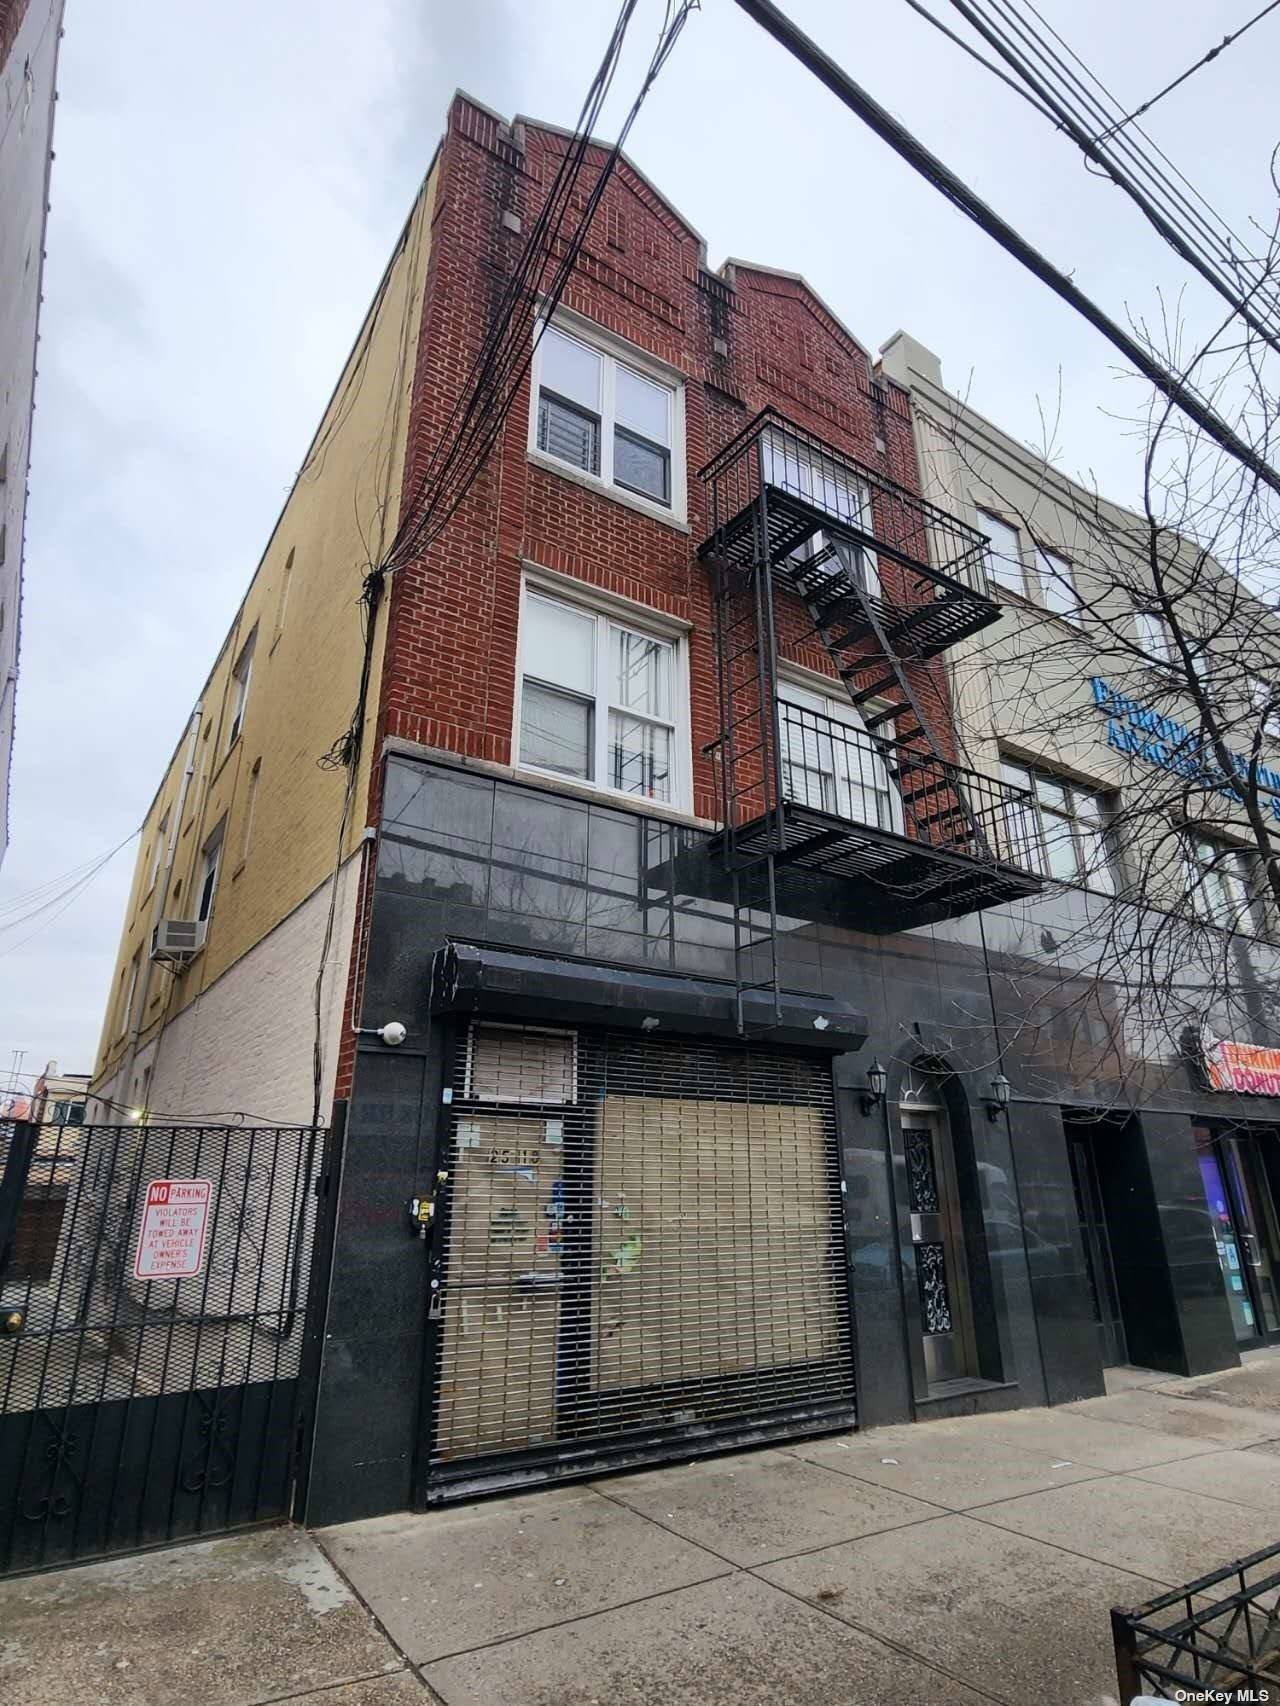 Turnkey investment property in the heart of Astoria, Zoning R6A C1 4, two blocks from subway Broadway stop N, W lines 12 Minutes to Manhattan.